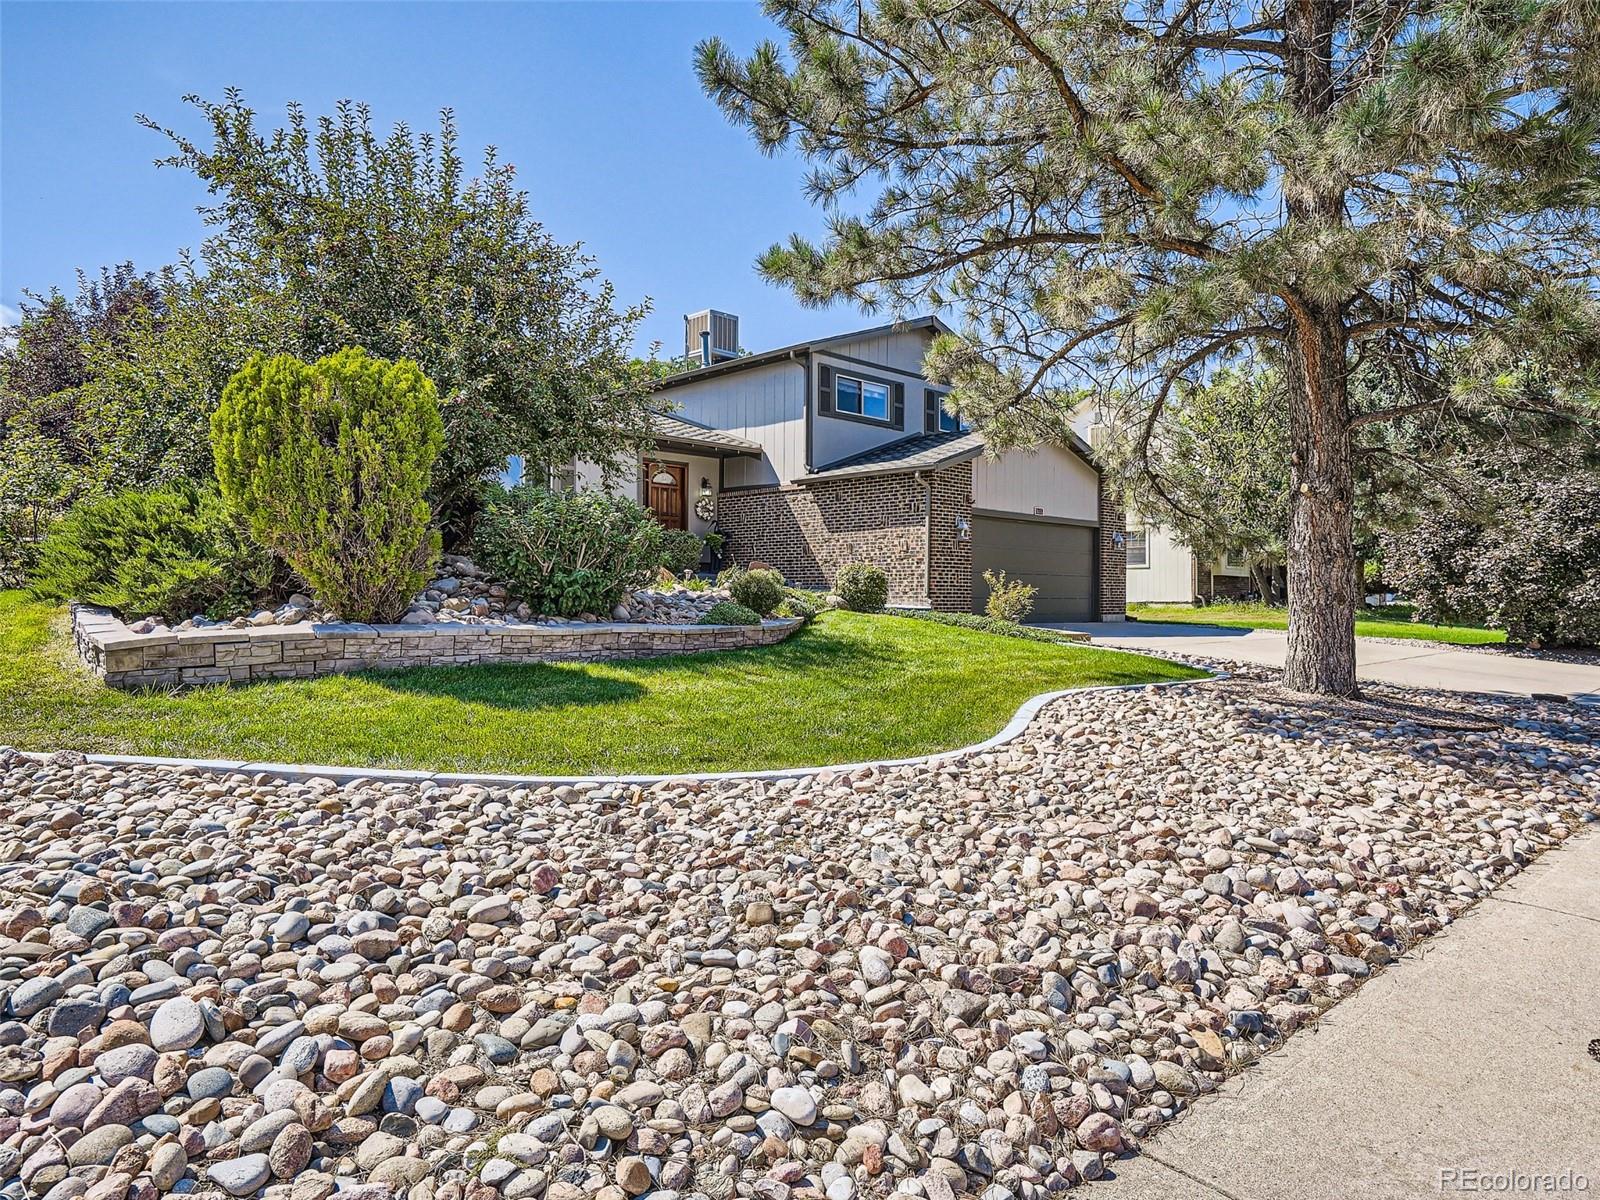 5355  camargo road, Littleton sold home. Closed on 2023-10-31 for $701,000.